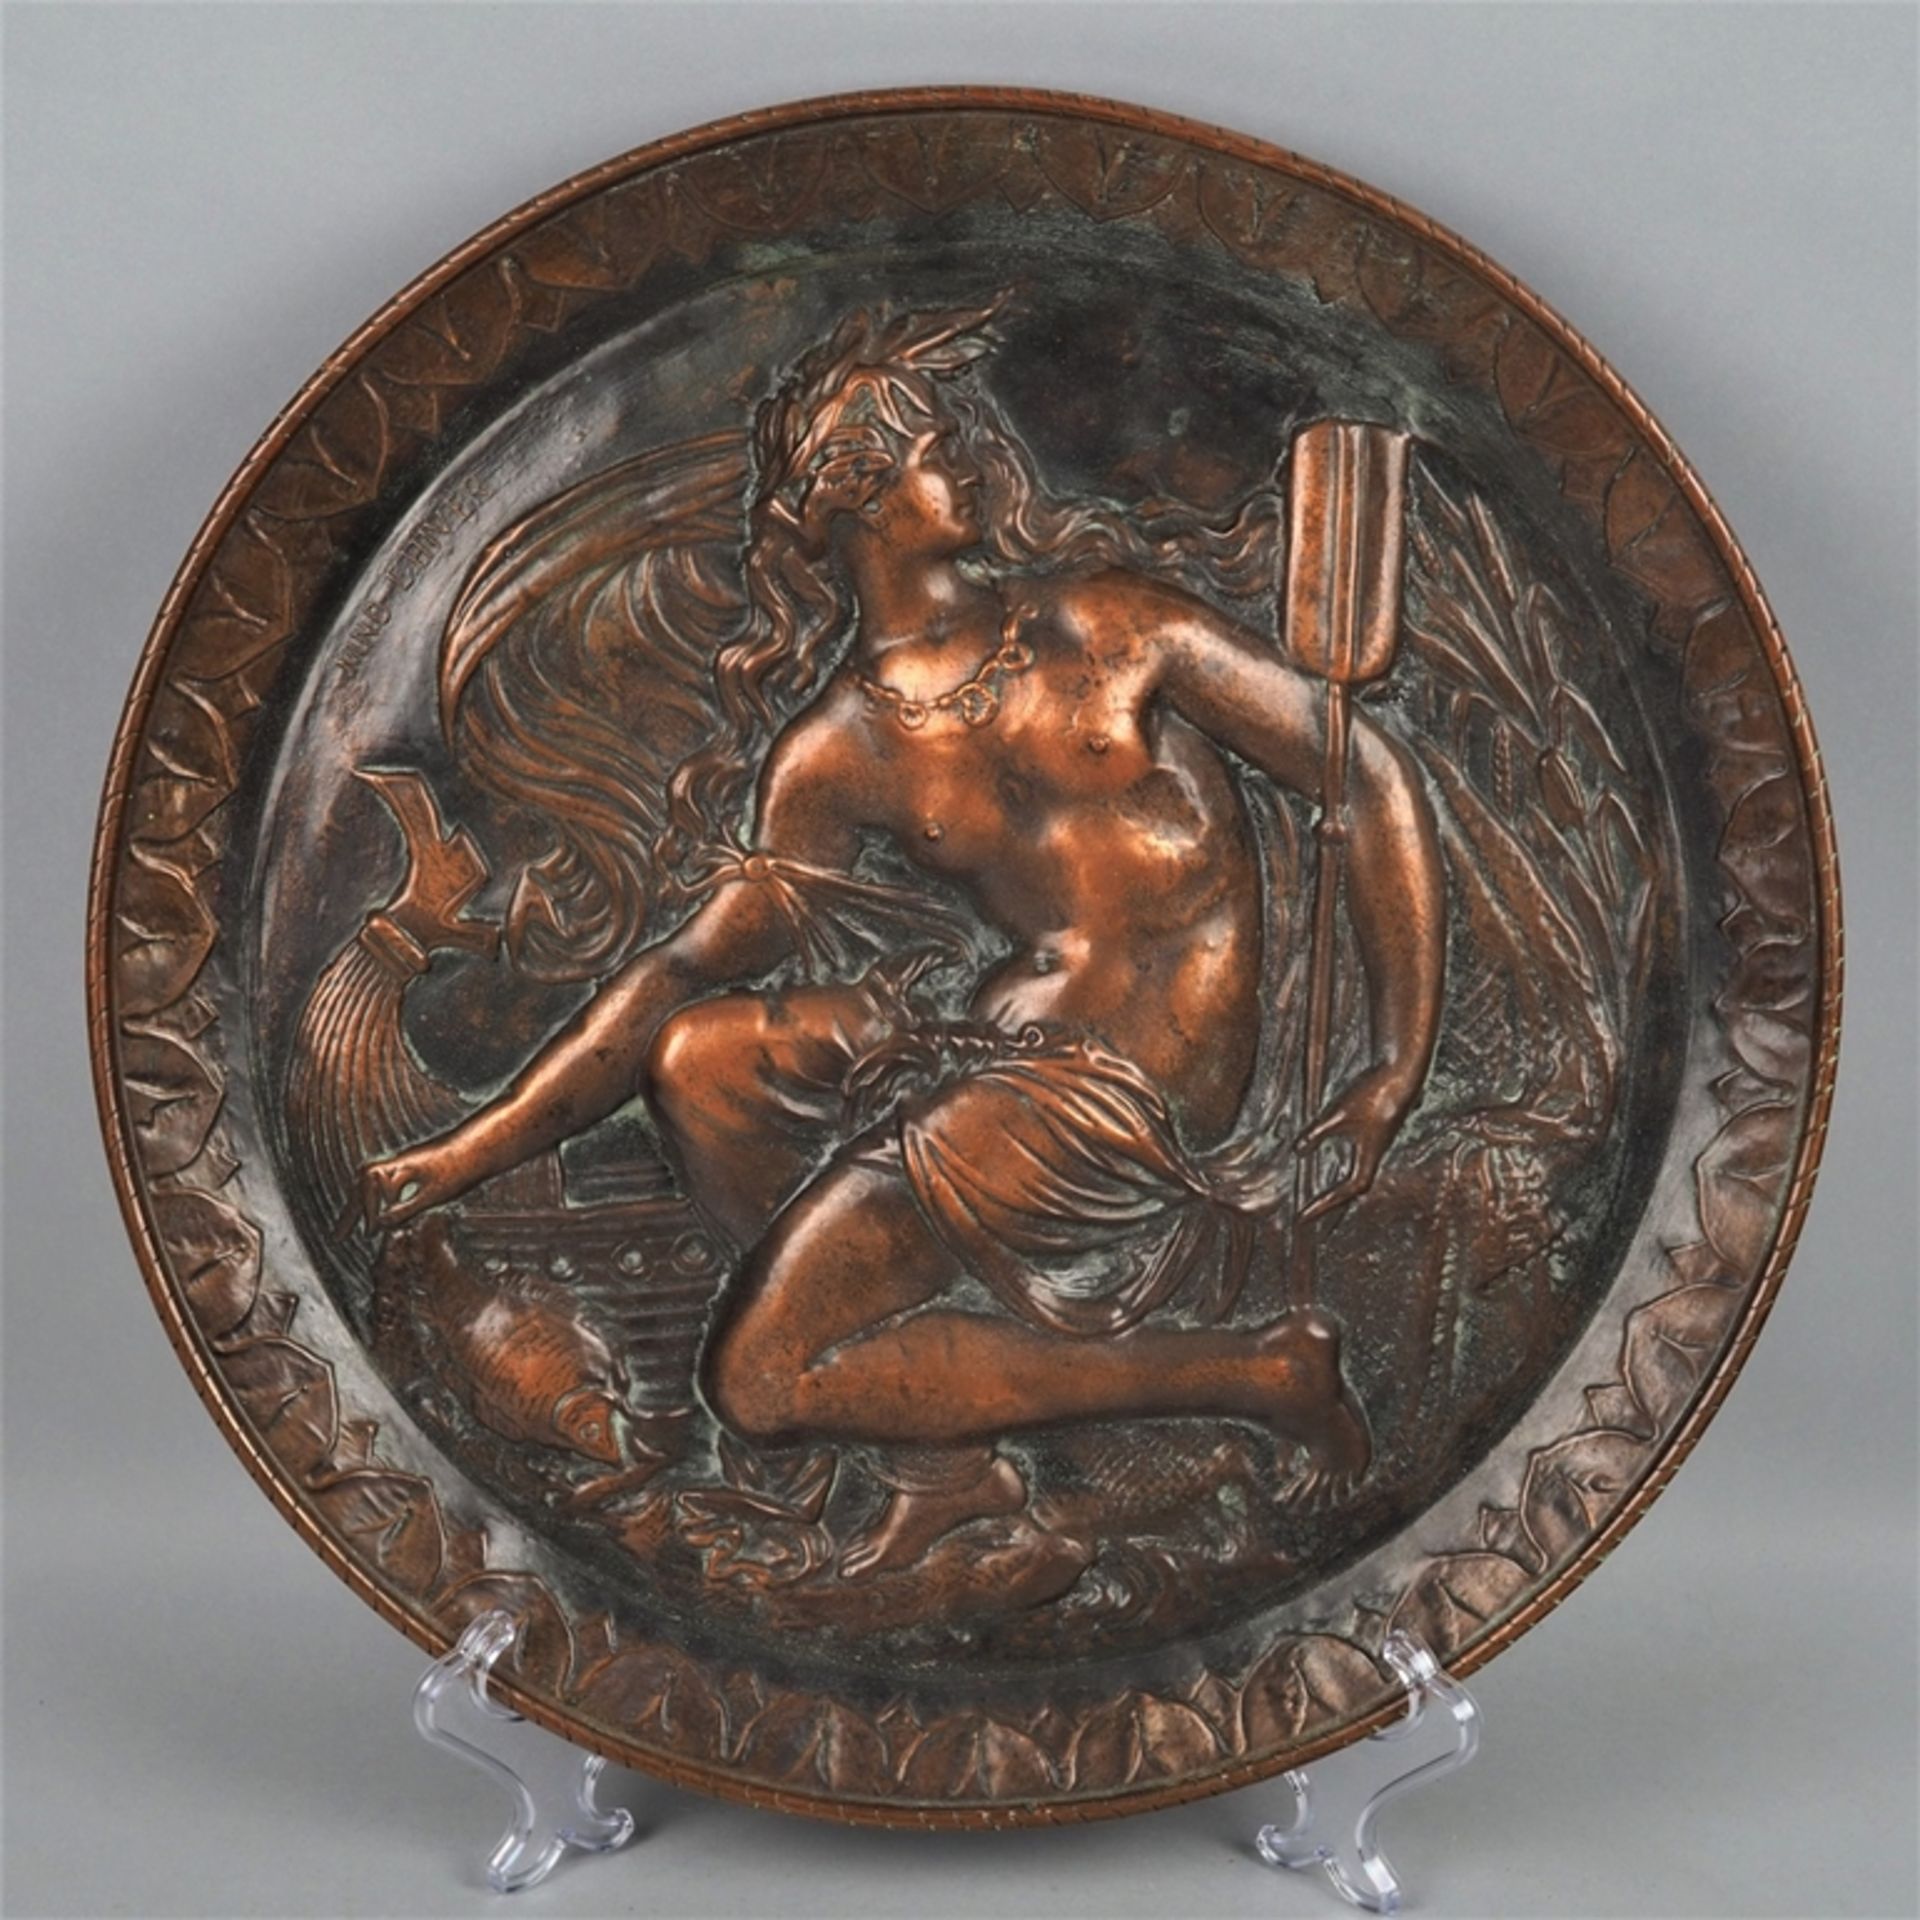 Large relief plate around 1900